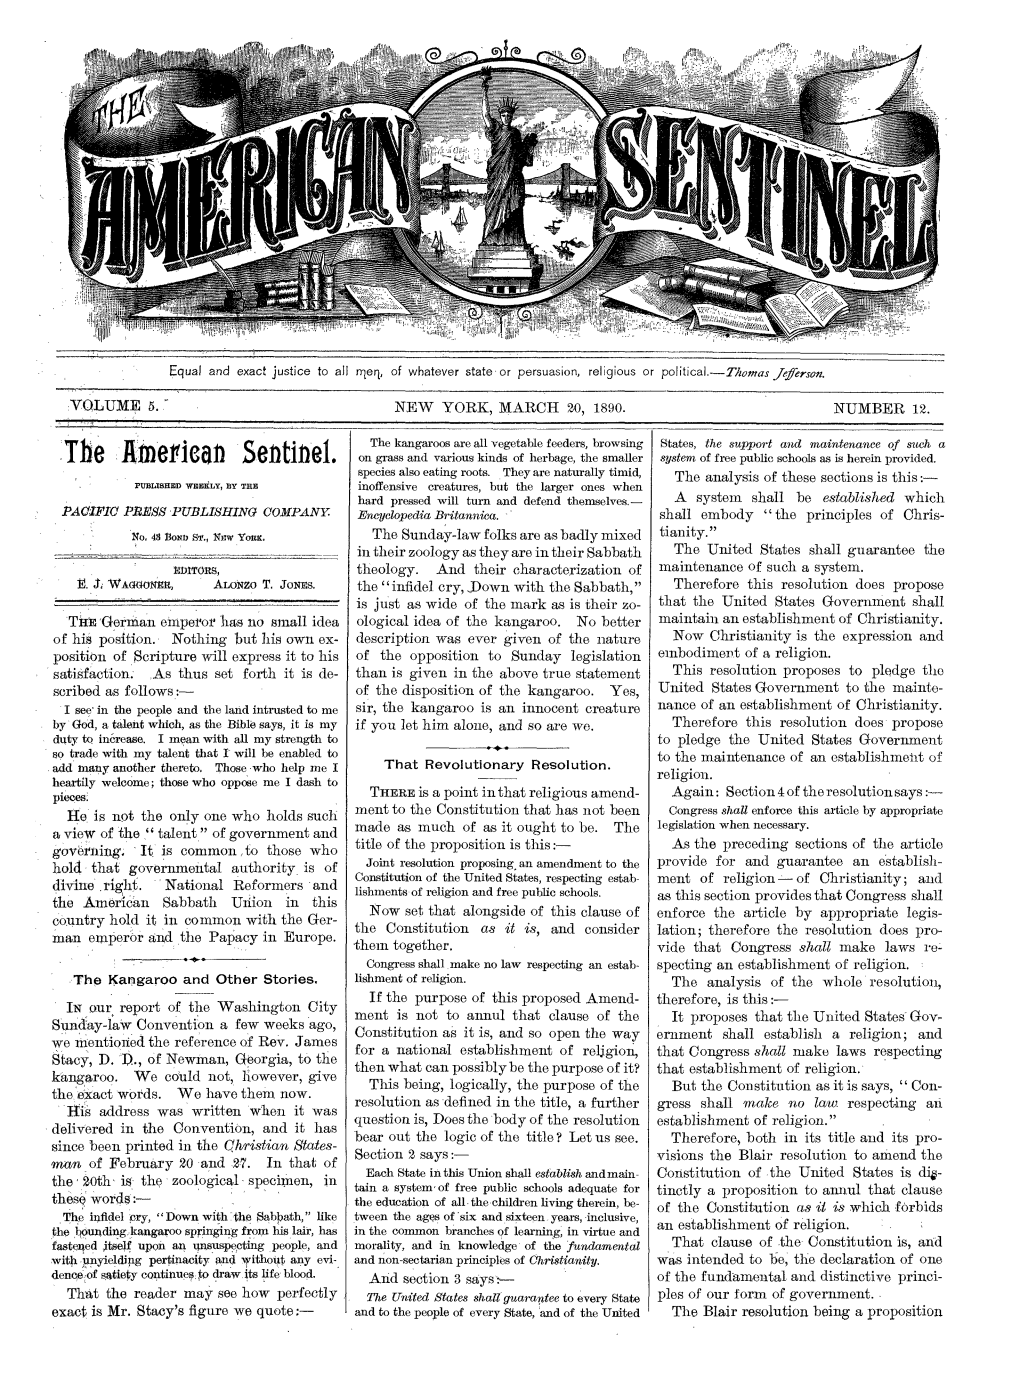 American Sentinel for 1890